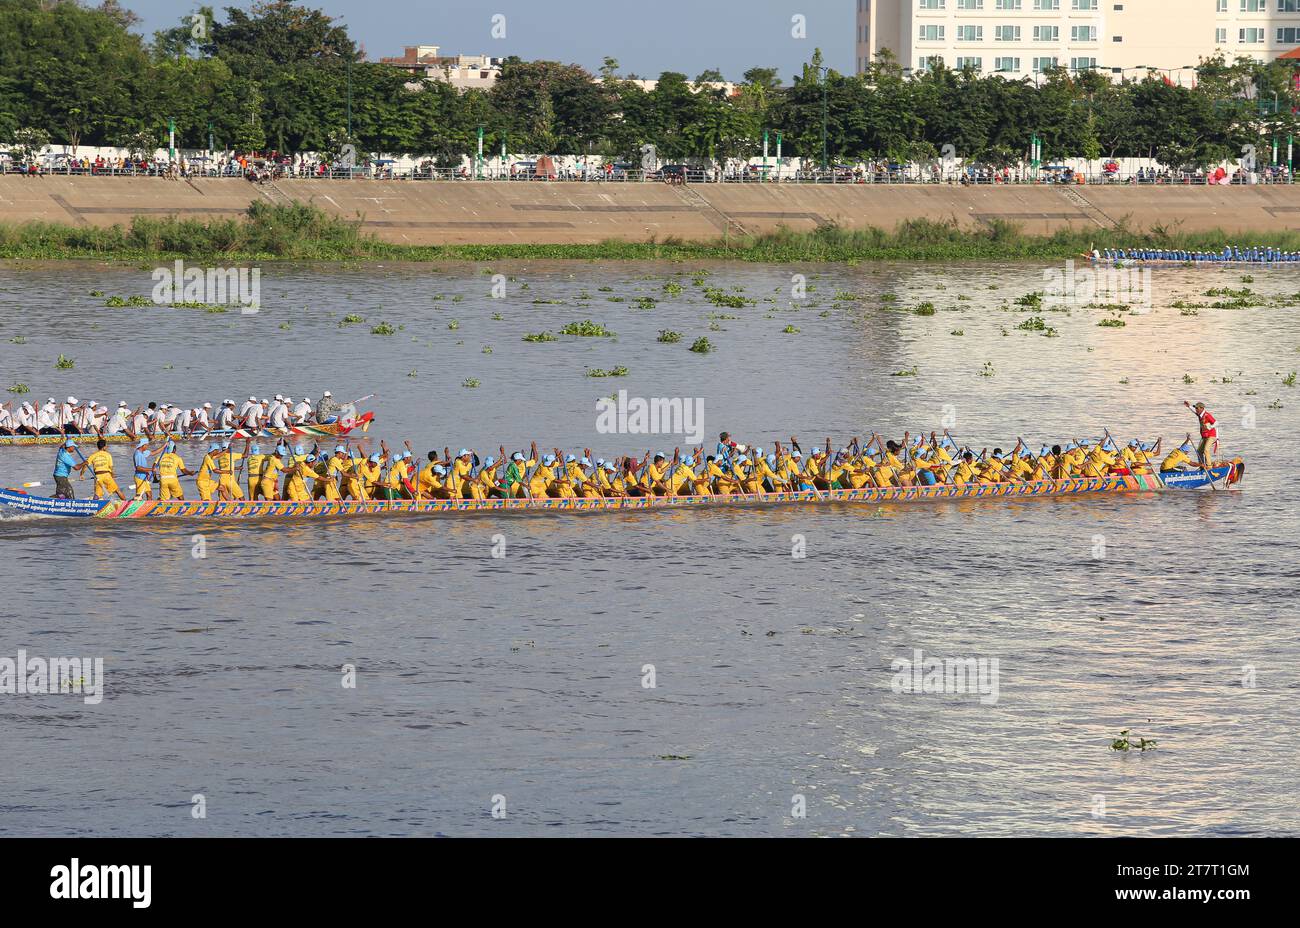 Dragonboats racing competition for Bon Om Touk Water Festival in Phnom Penh on Tonle Sap & Mekong River confluence, traditional boat races, Cambodia Stock Photo